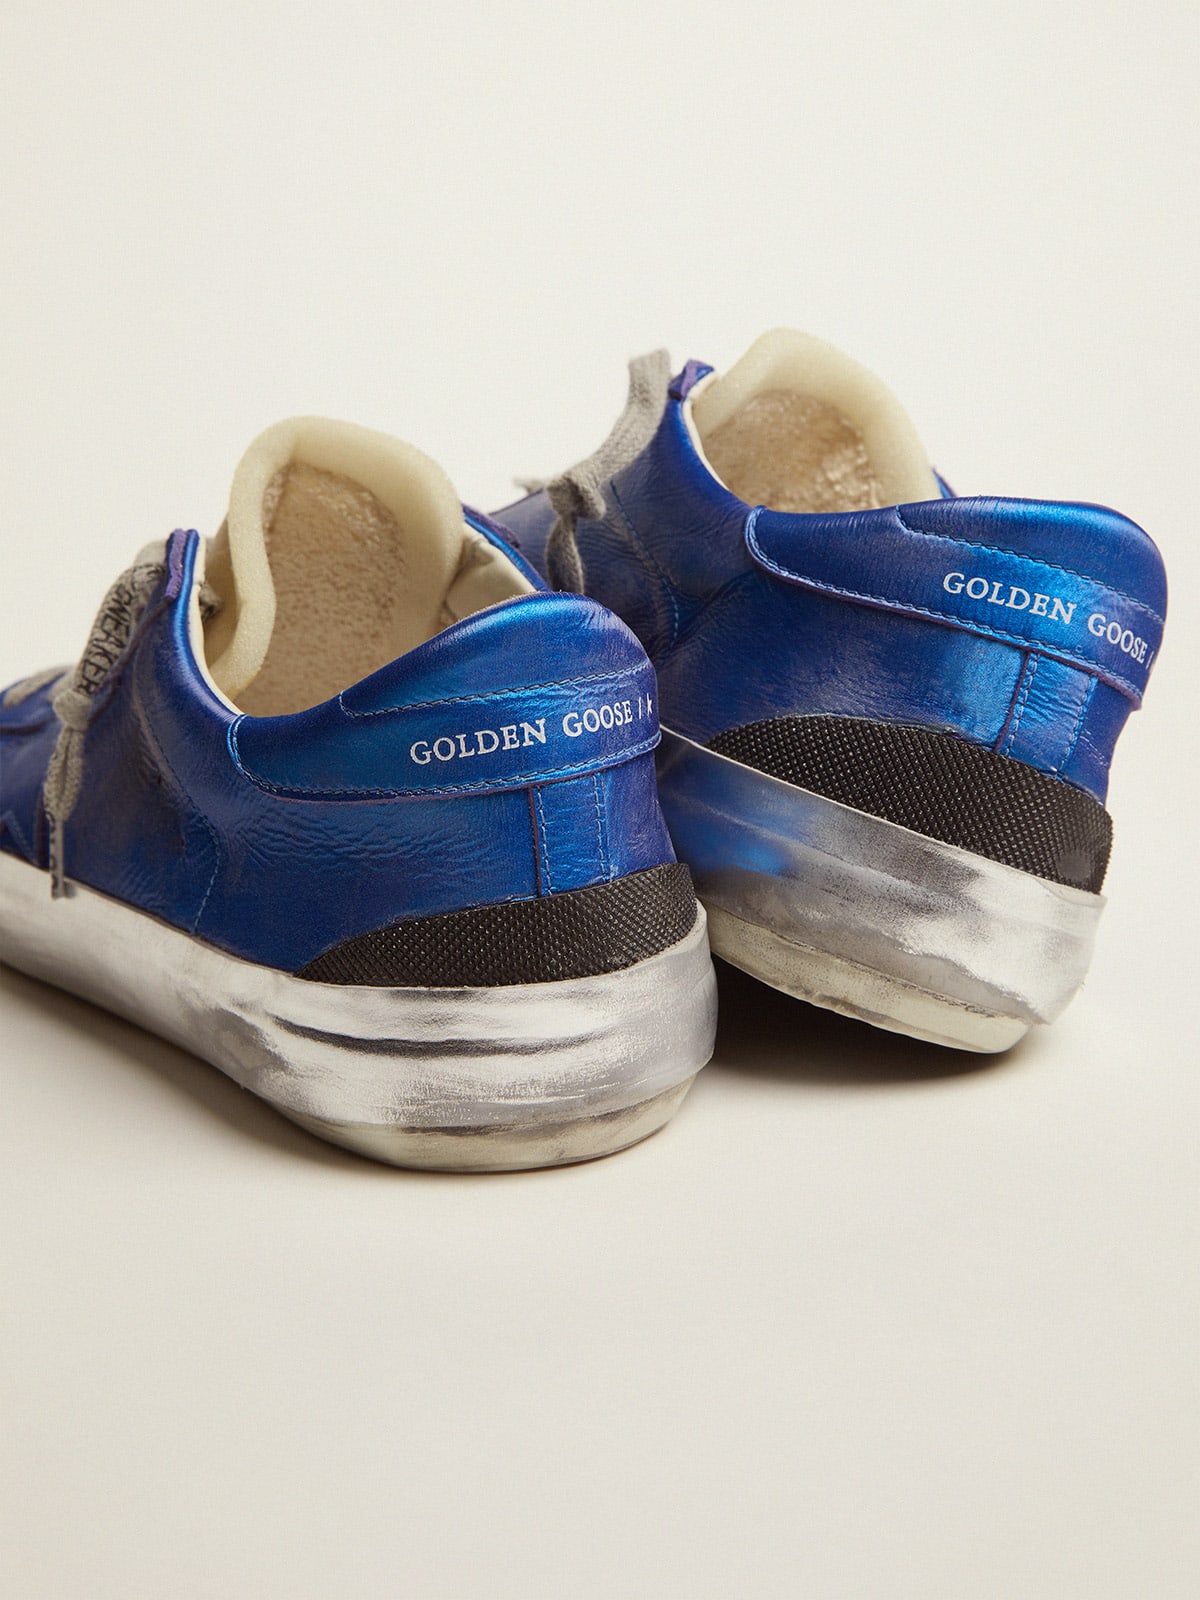 Golden Goose - Super-Star Penstar sneakers in blue laminated leather with multi-foxing in 